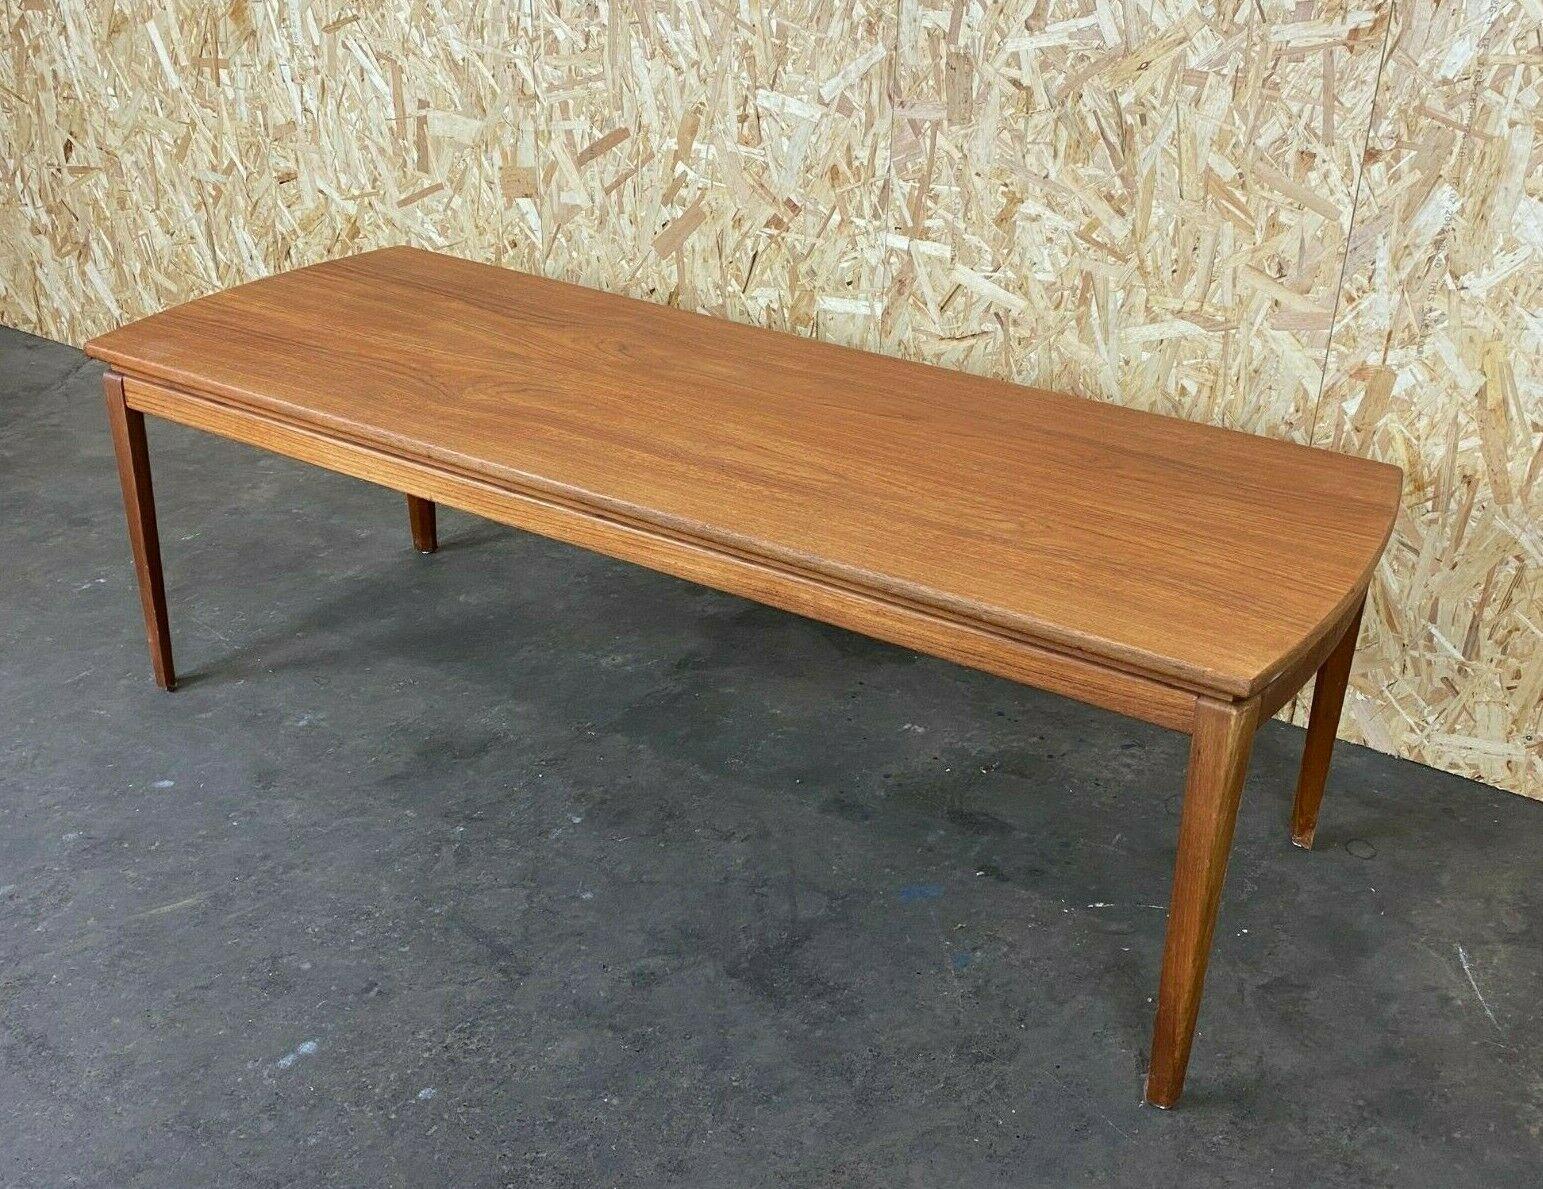 60s 70s Coffee table Danish Design Denmark mid-century

Object: coffee table

Manufacturer:

Condition: good

Age: around 1960-1970

Dimensions:

152cm x 56cm x 50cm

Other notes:

The pictures serve as part of the